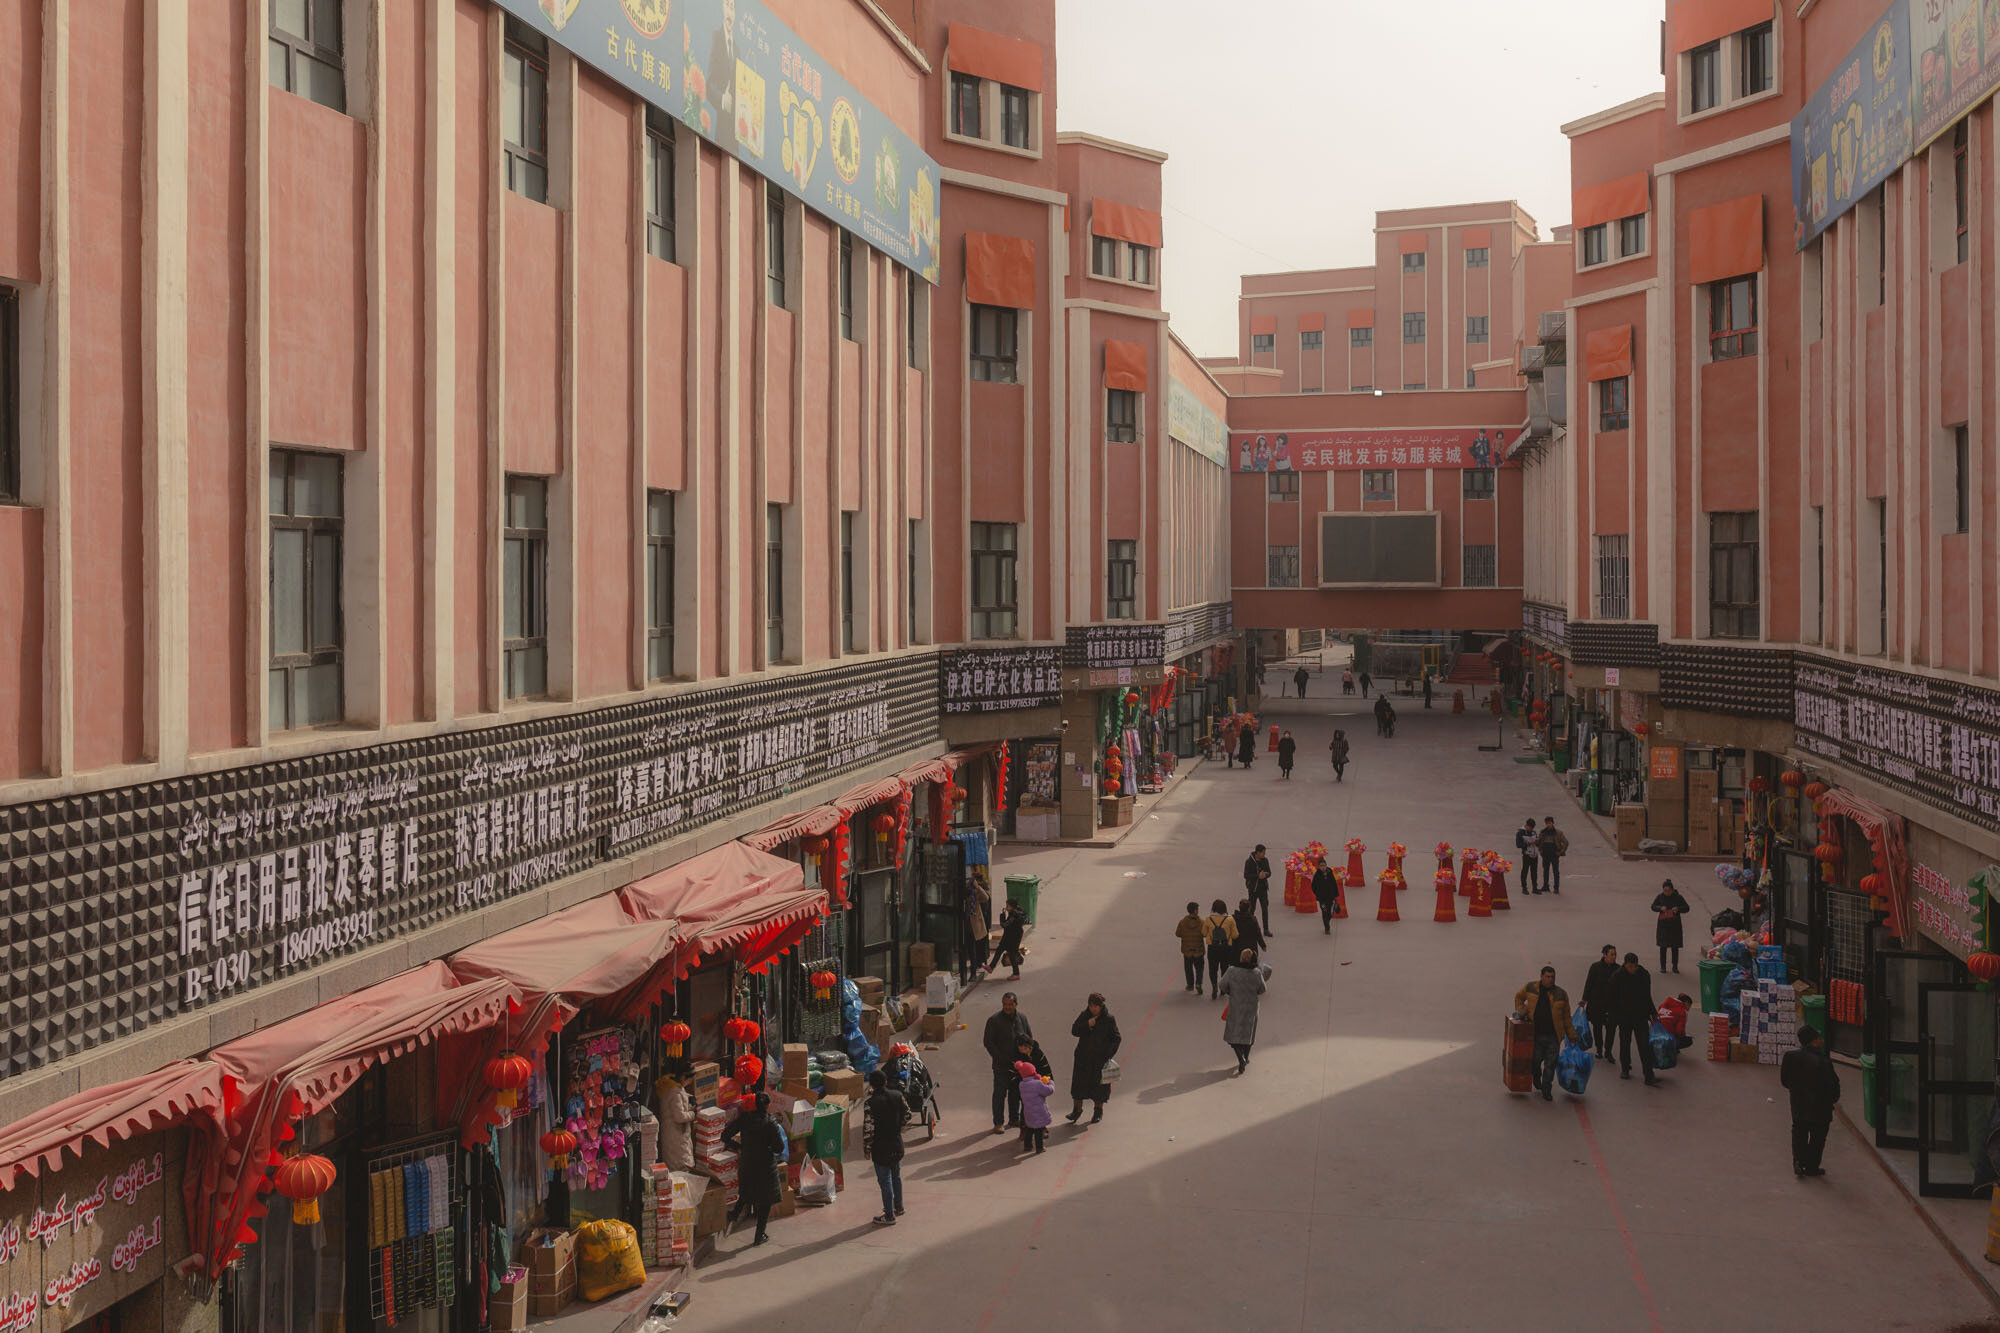  February 2nd 2019. Hotan, Xinjiang province. View over a local bazar on a Saturday afternoon. 